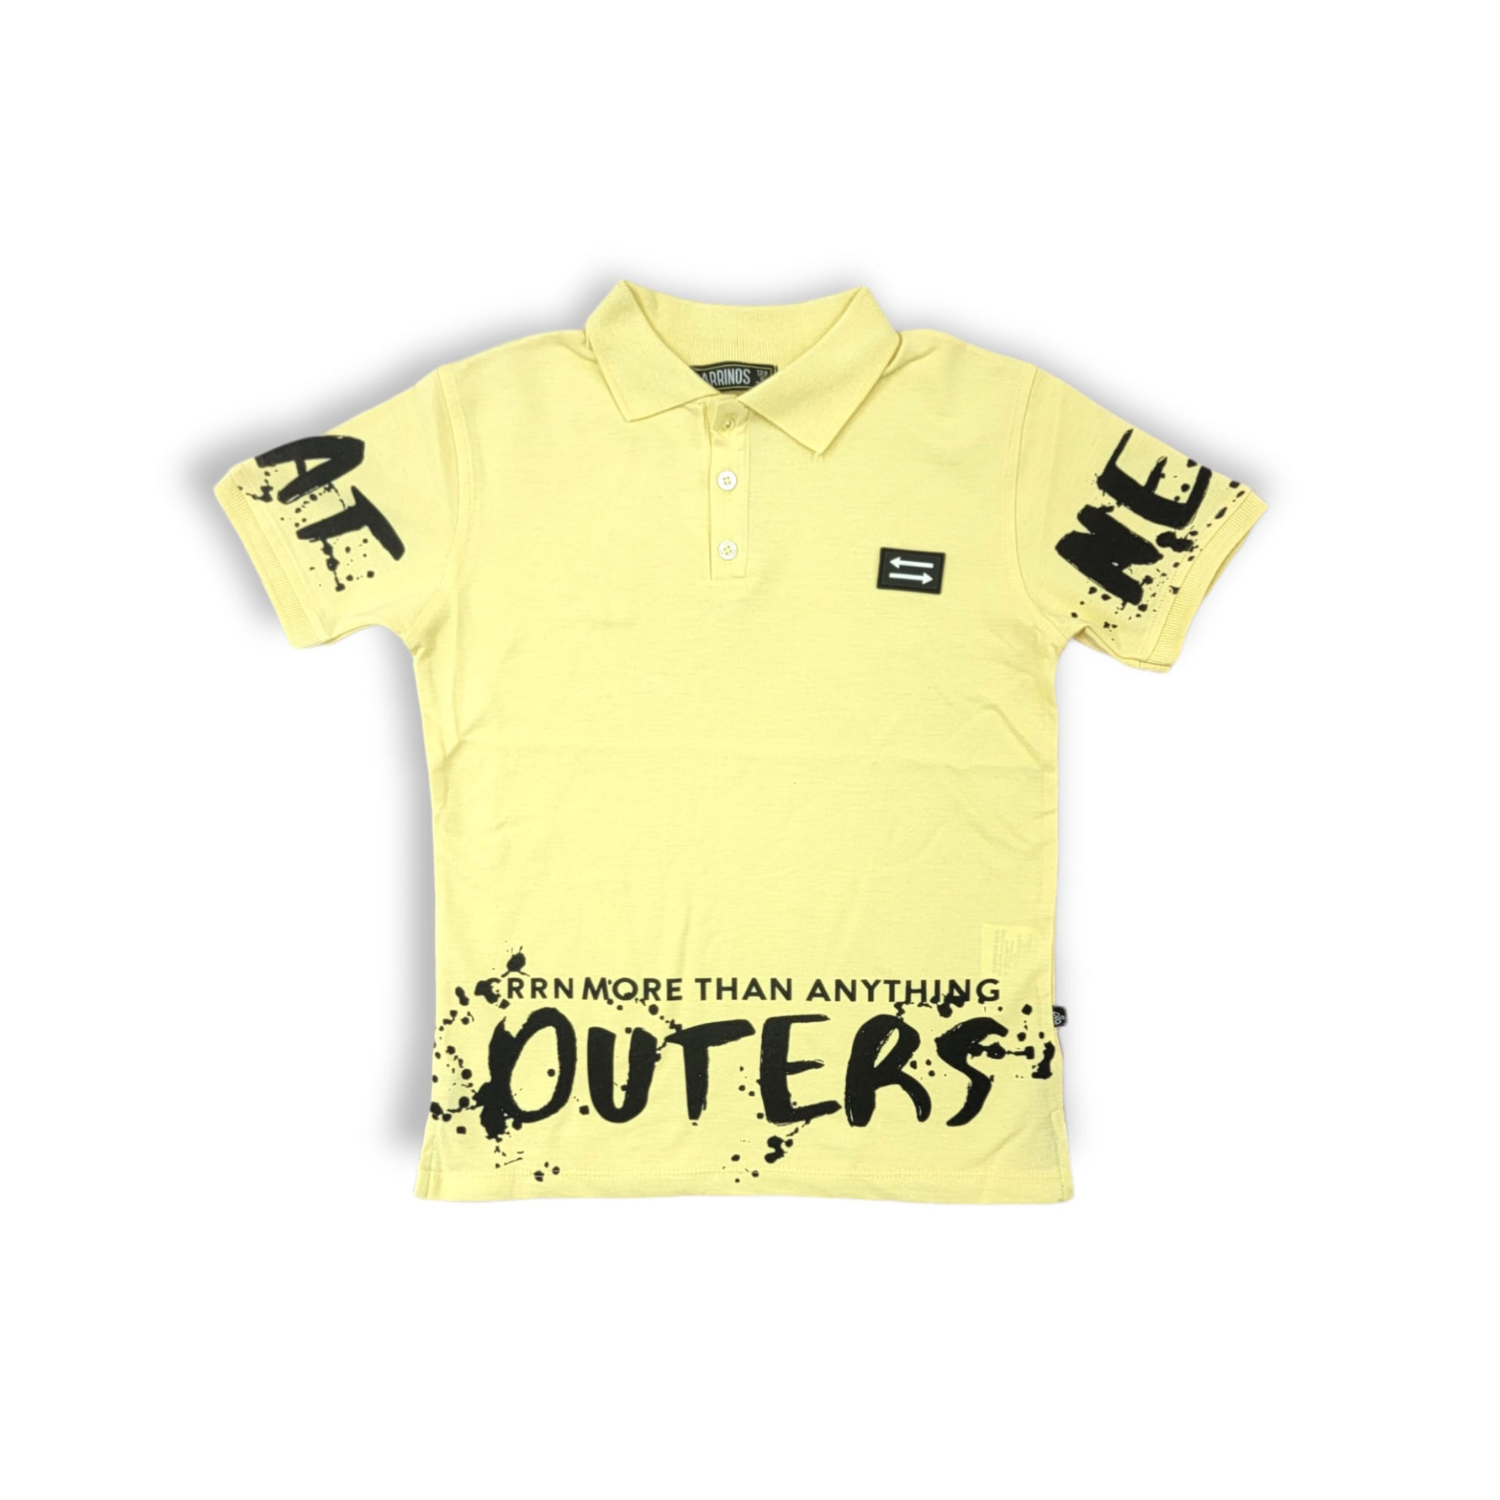 The Outers Boys Polo Shirt